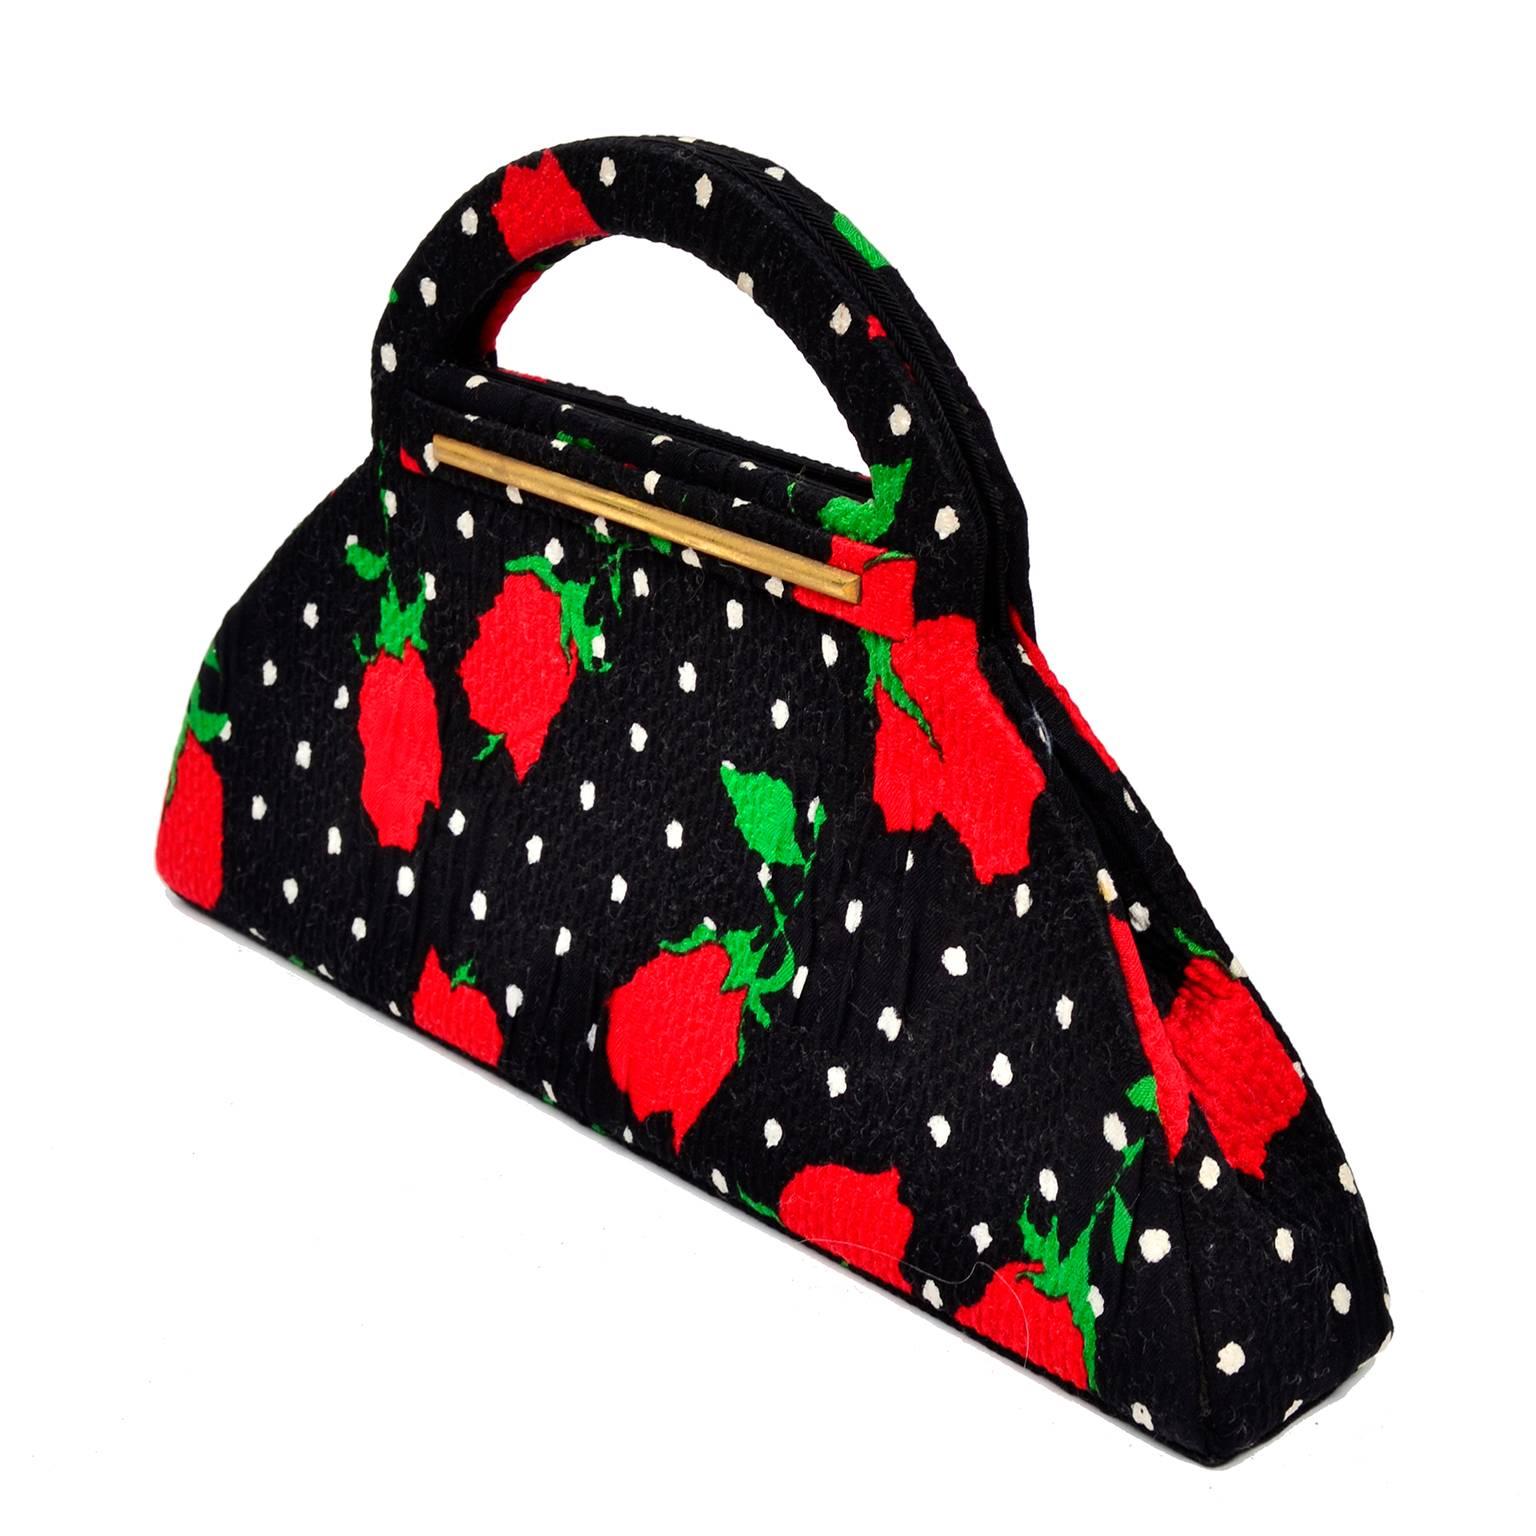 black purse with red roses